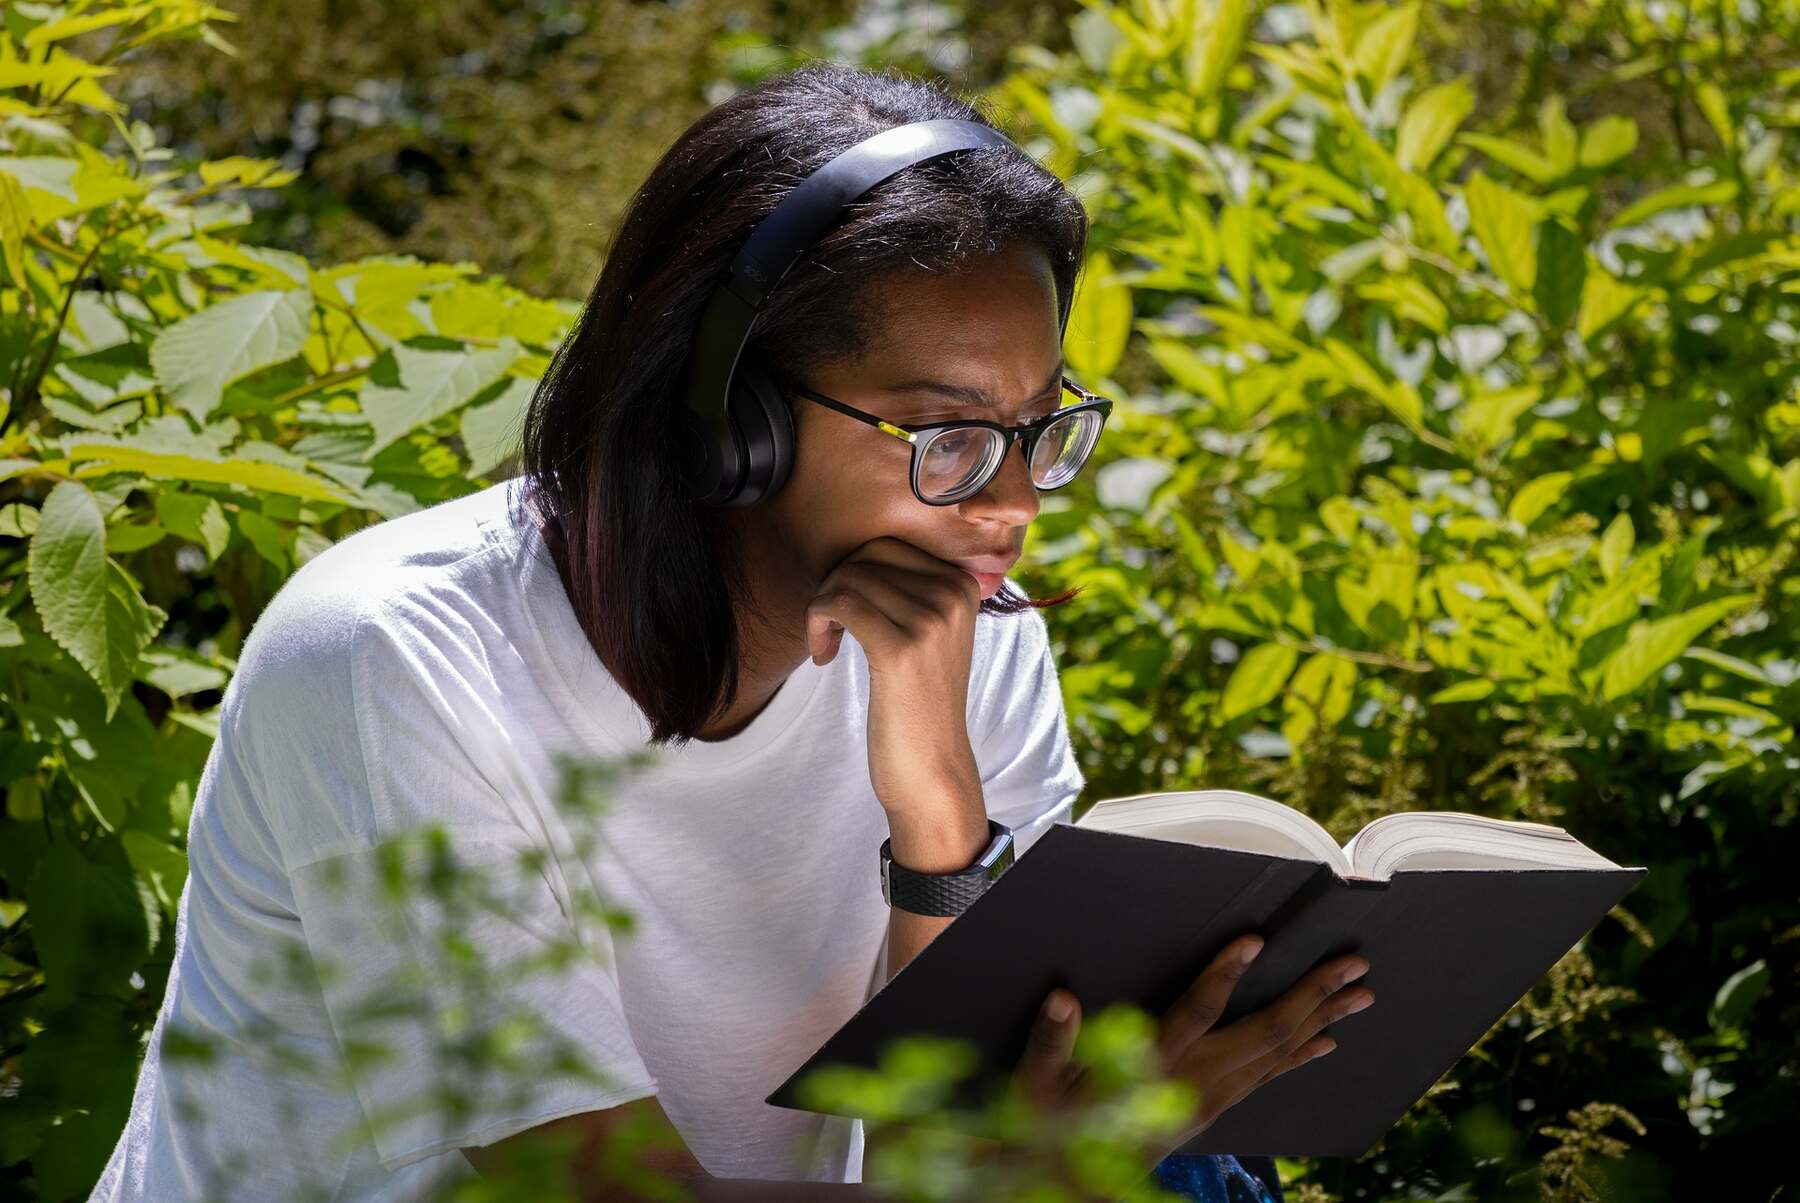 A woman with headphones reading a book on a garden